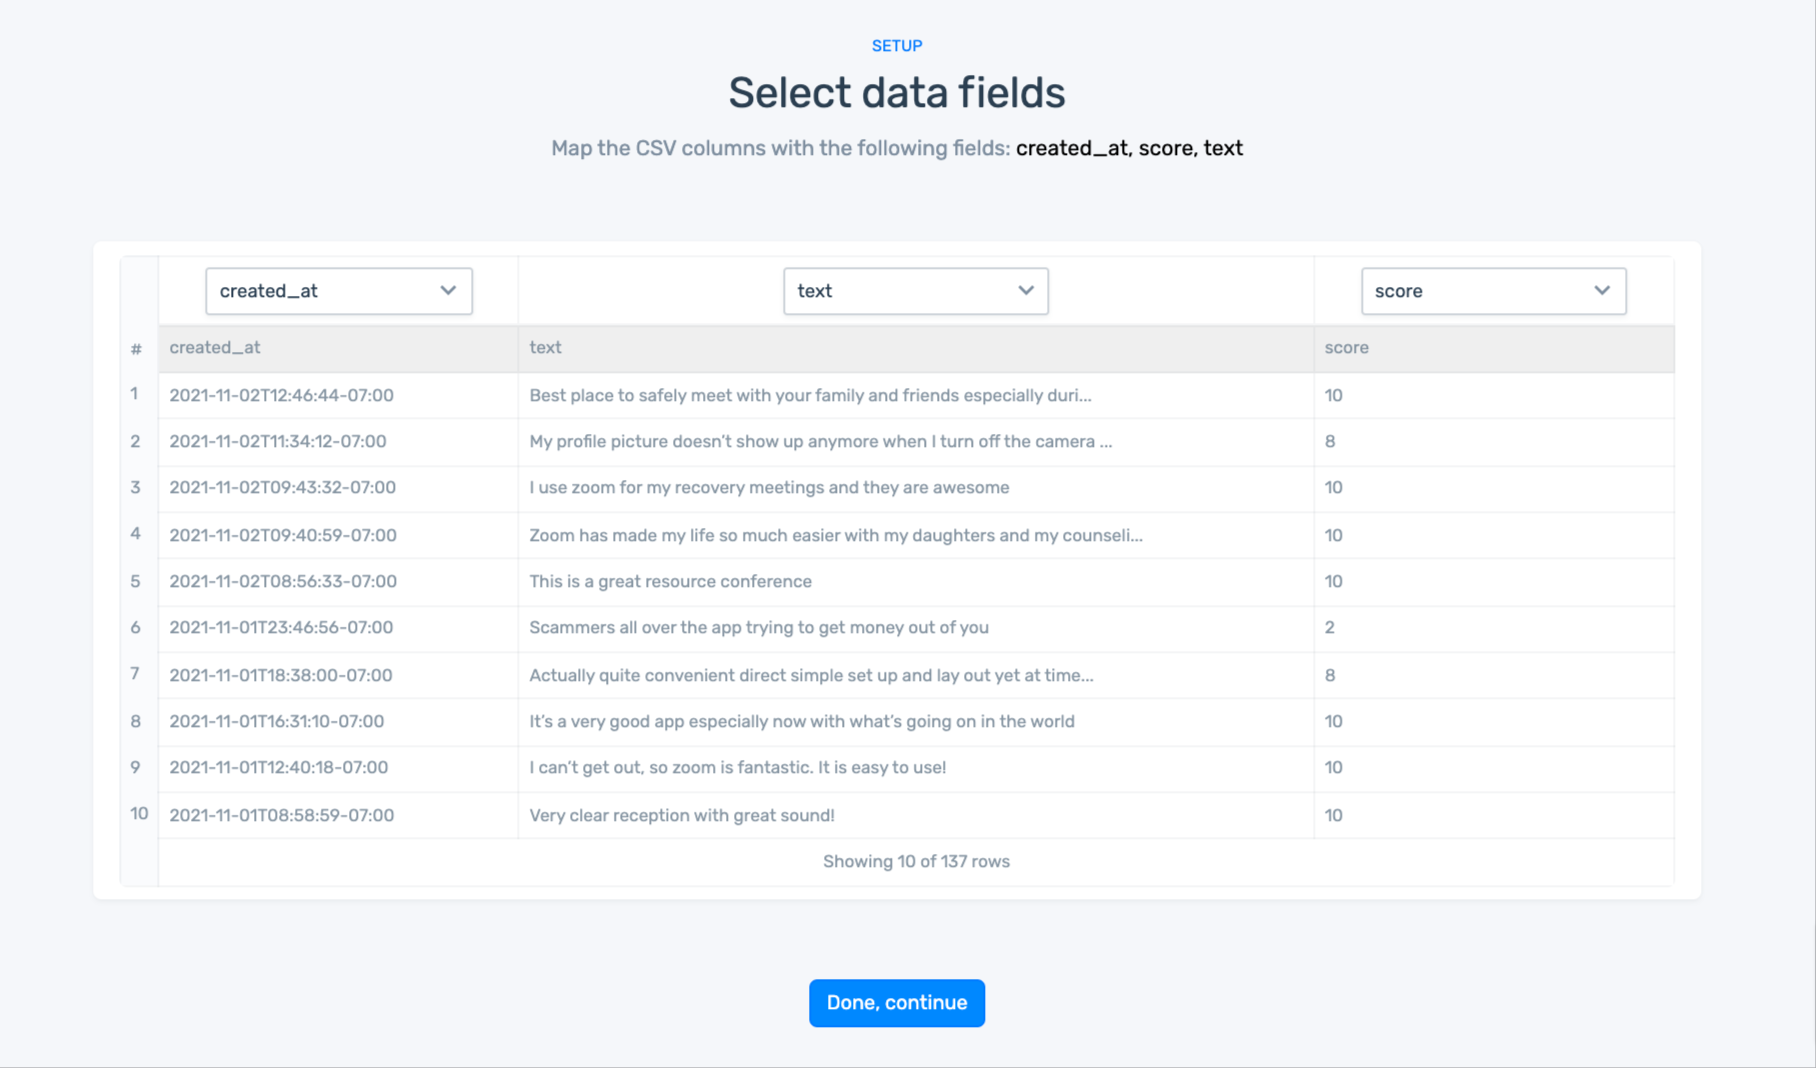 Select and match your data to the right fields